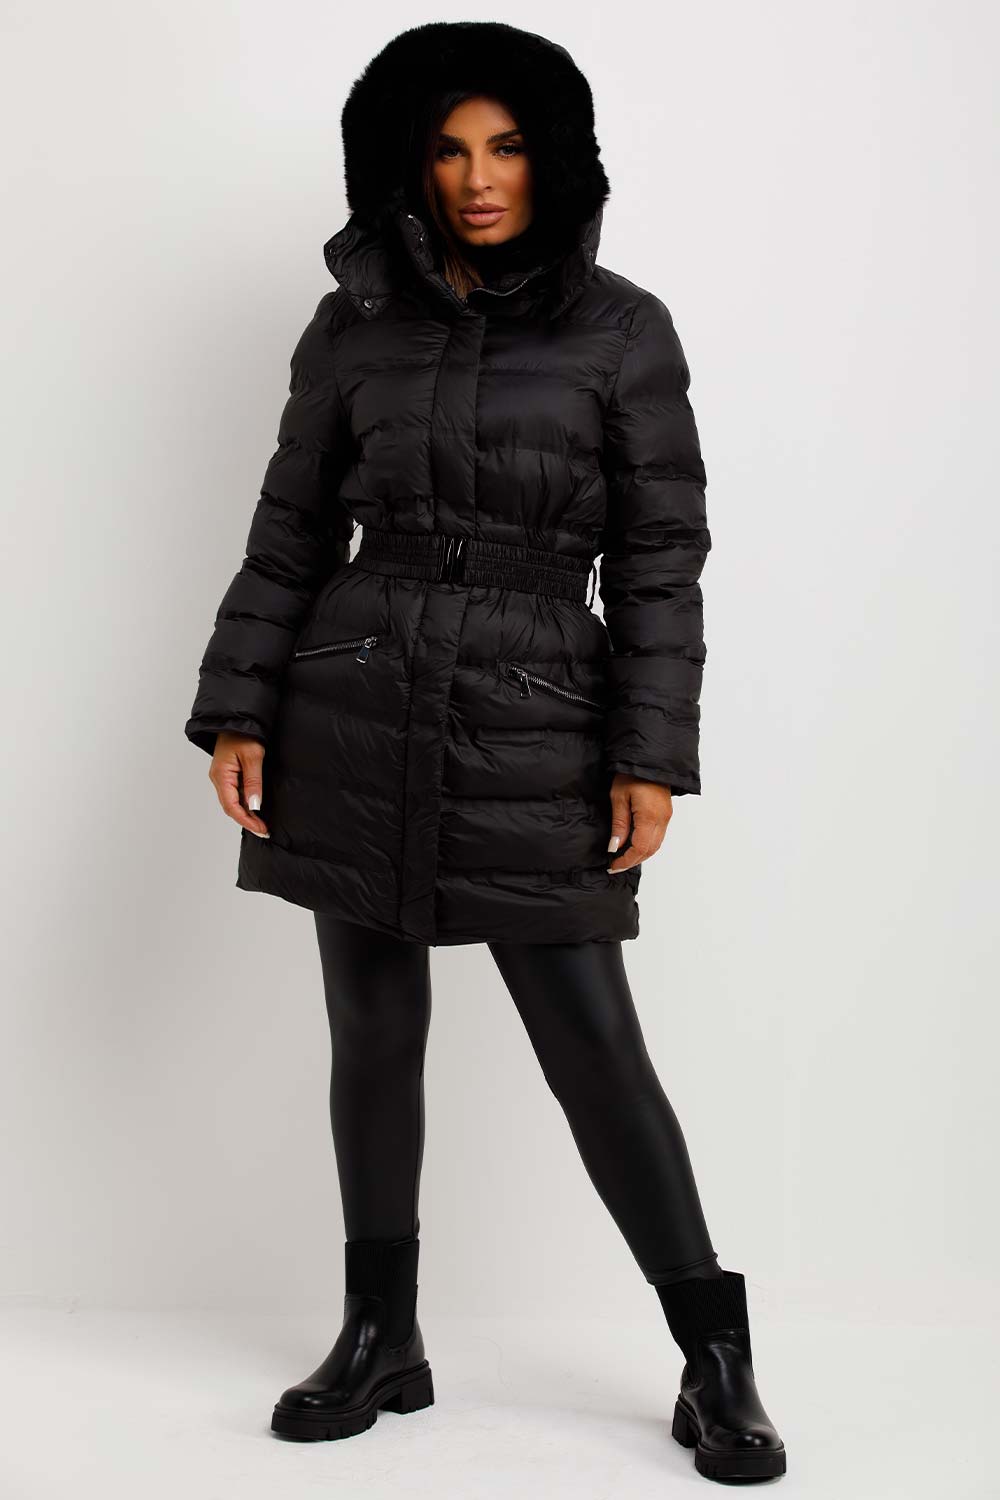 womens black puffer coat with fur hood and belt outerwear